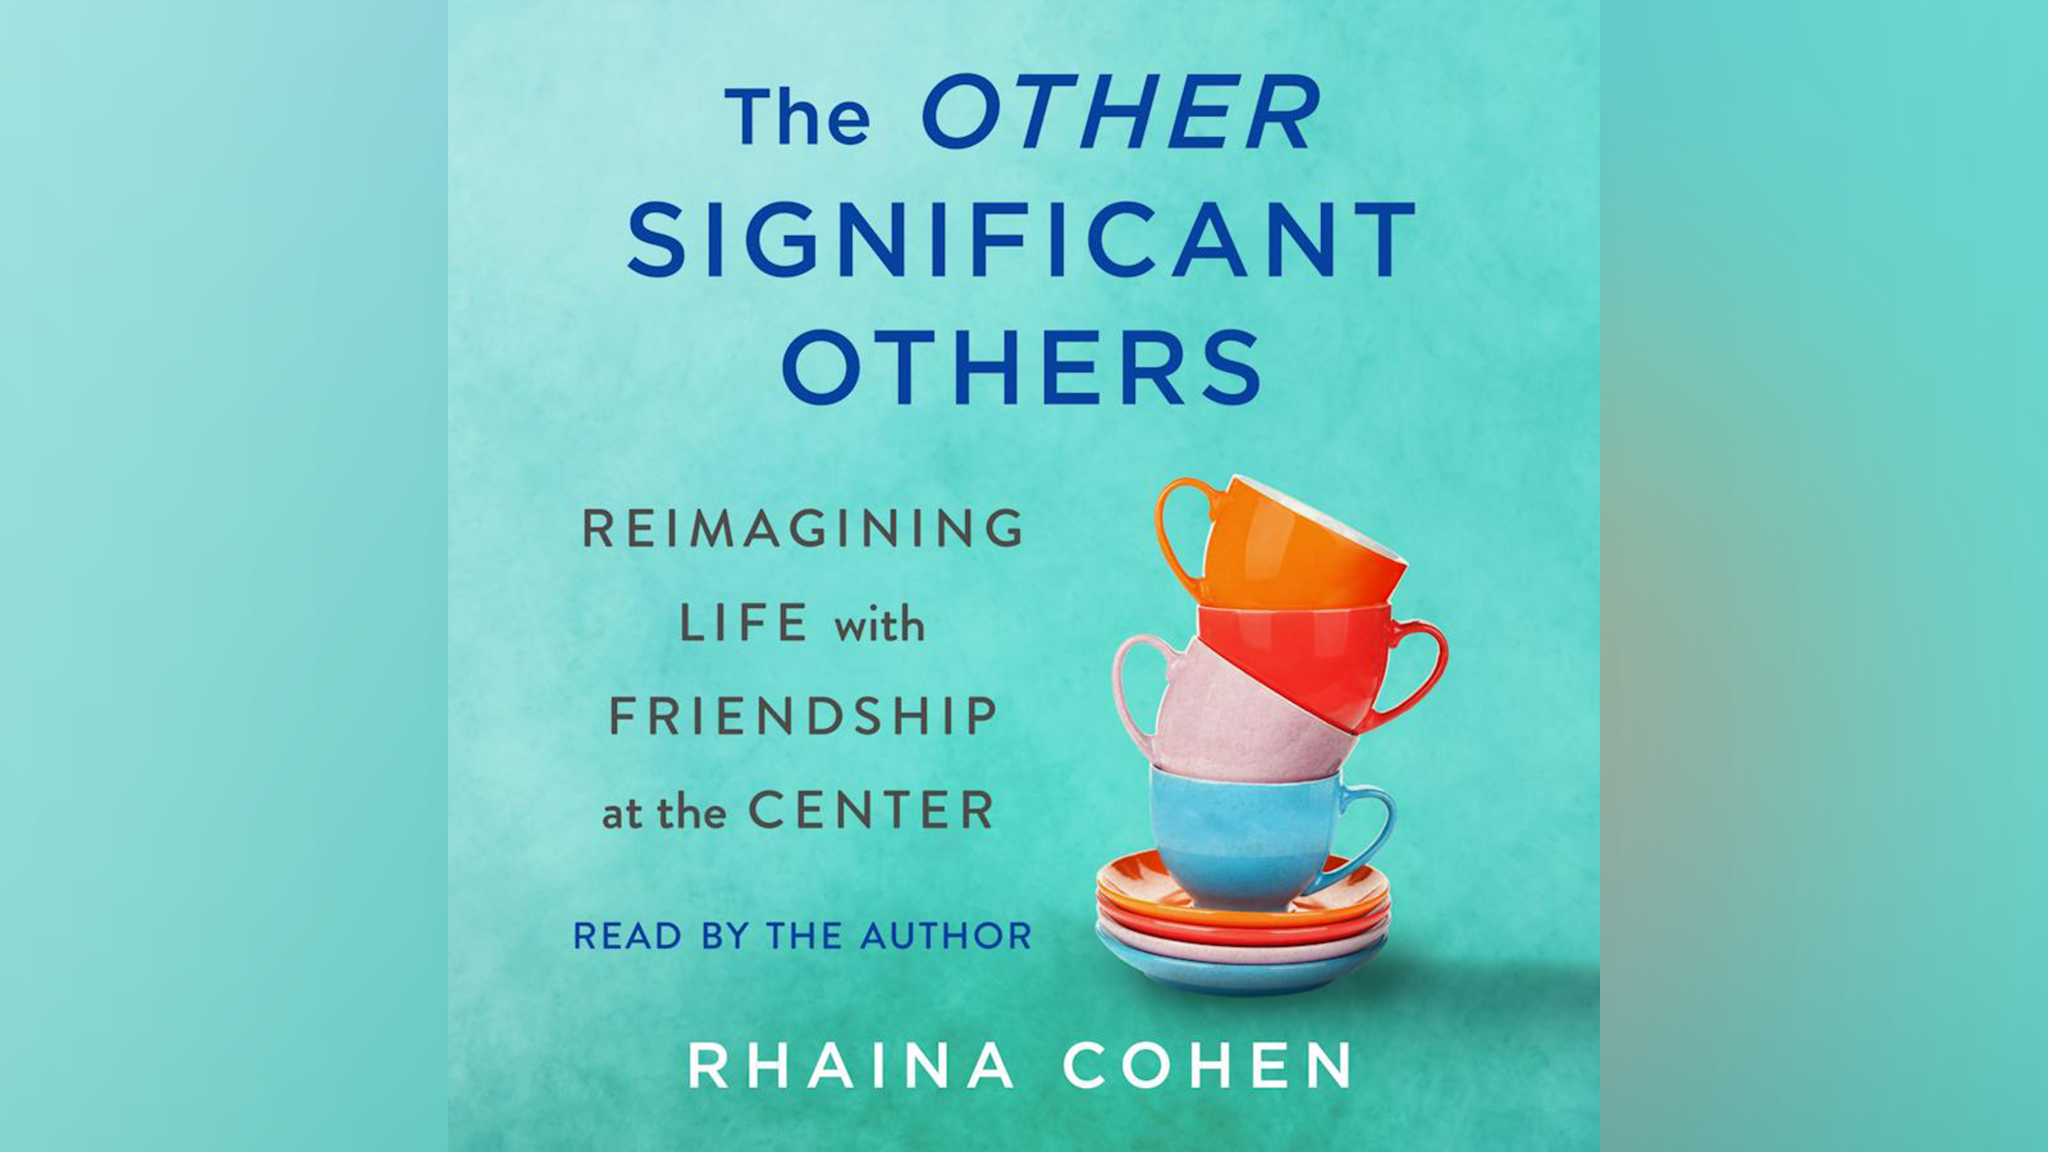 In her new book, "The Other Significant Others," NPR's Rhaina Cohen explores the lives of people who have defied convention by choosing a friend as a life partner.